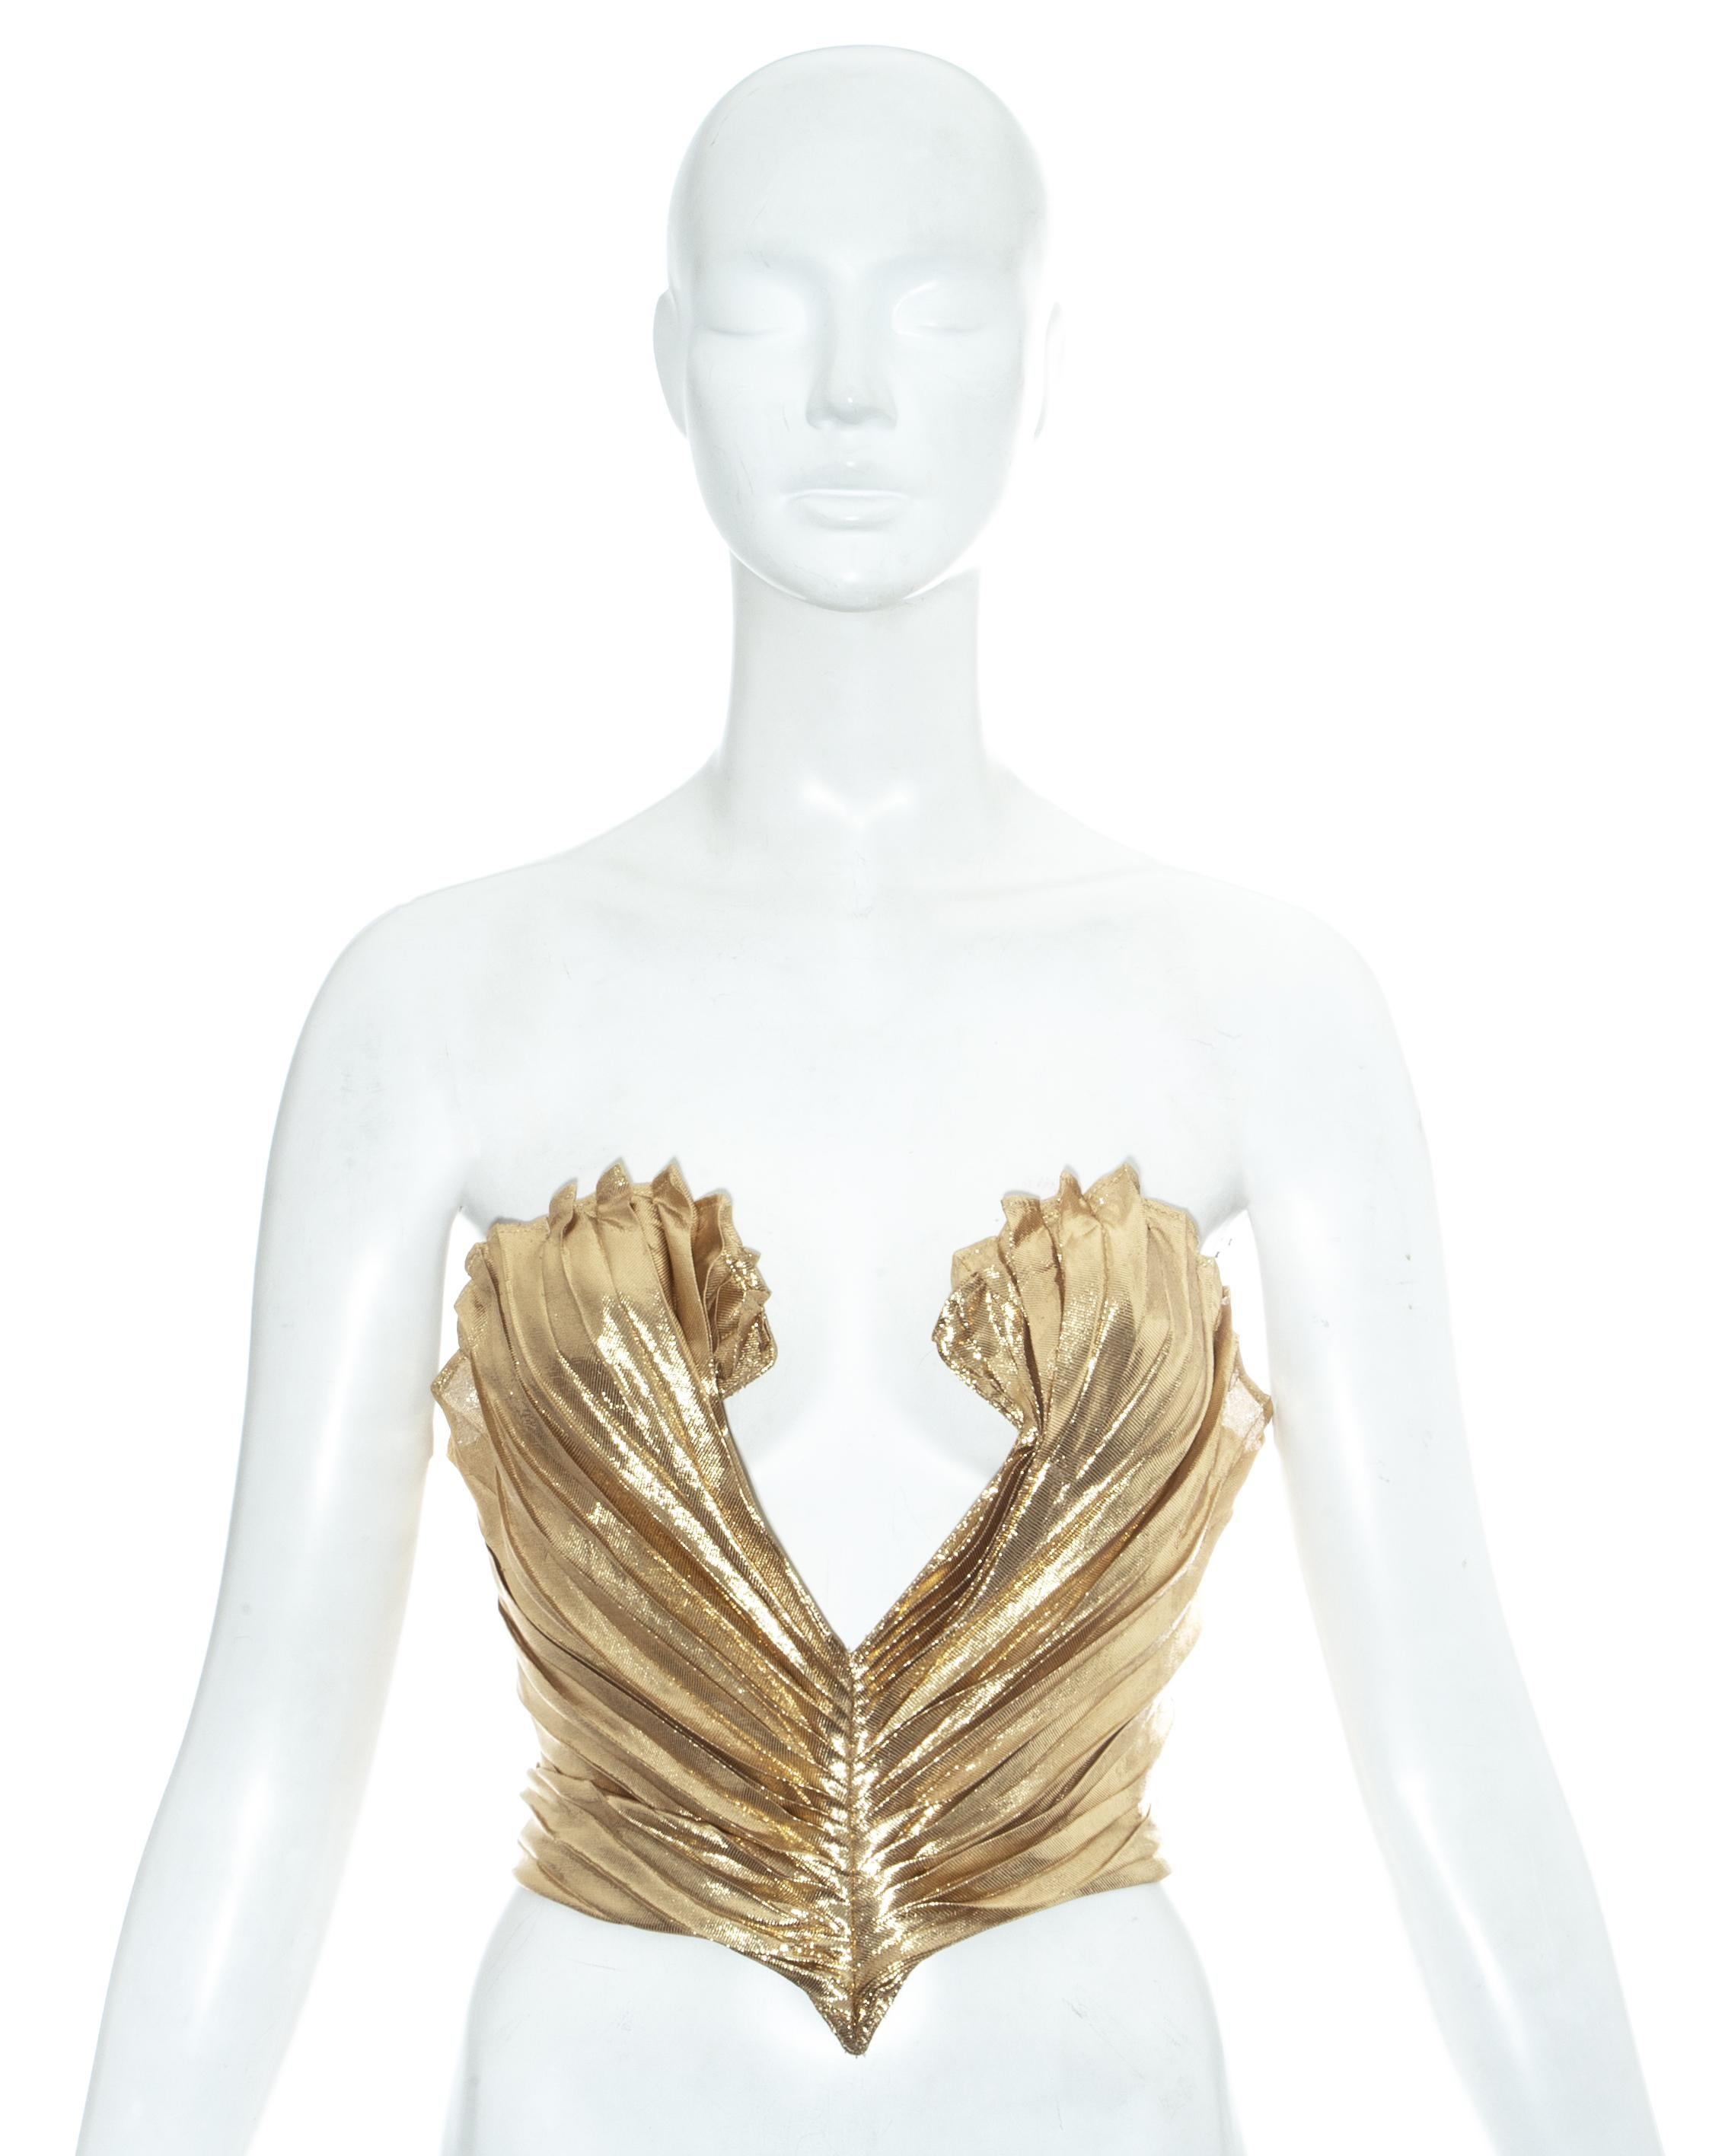 Thierry Mugler gold lamé corset bustier with scalloped edge, pleating throughout and low cleavage. Designed to cinch the waist and push the breasts up

Spring-Summer 1985